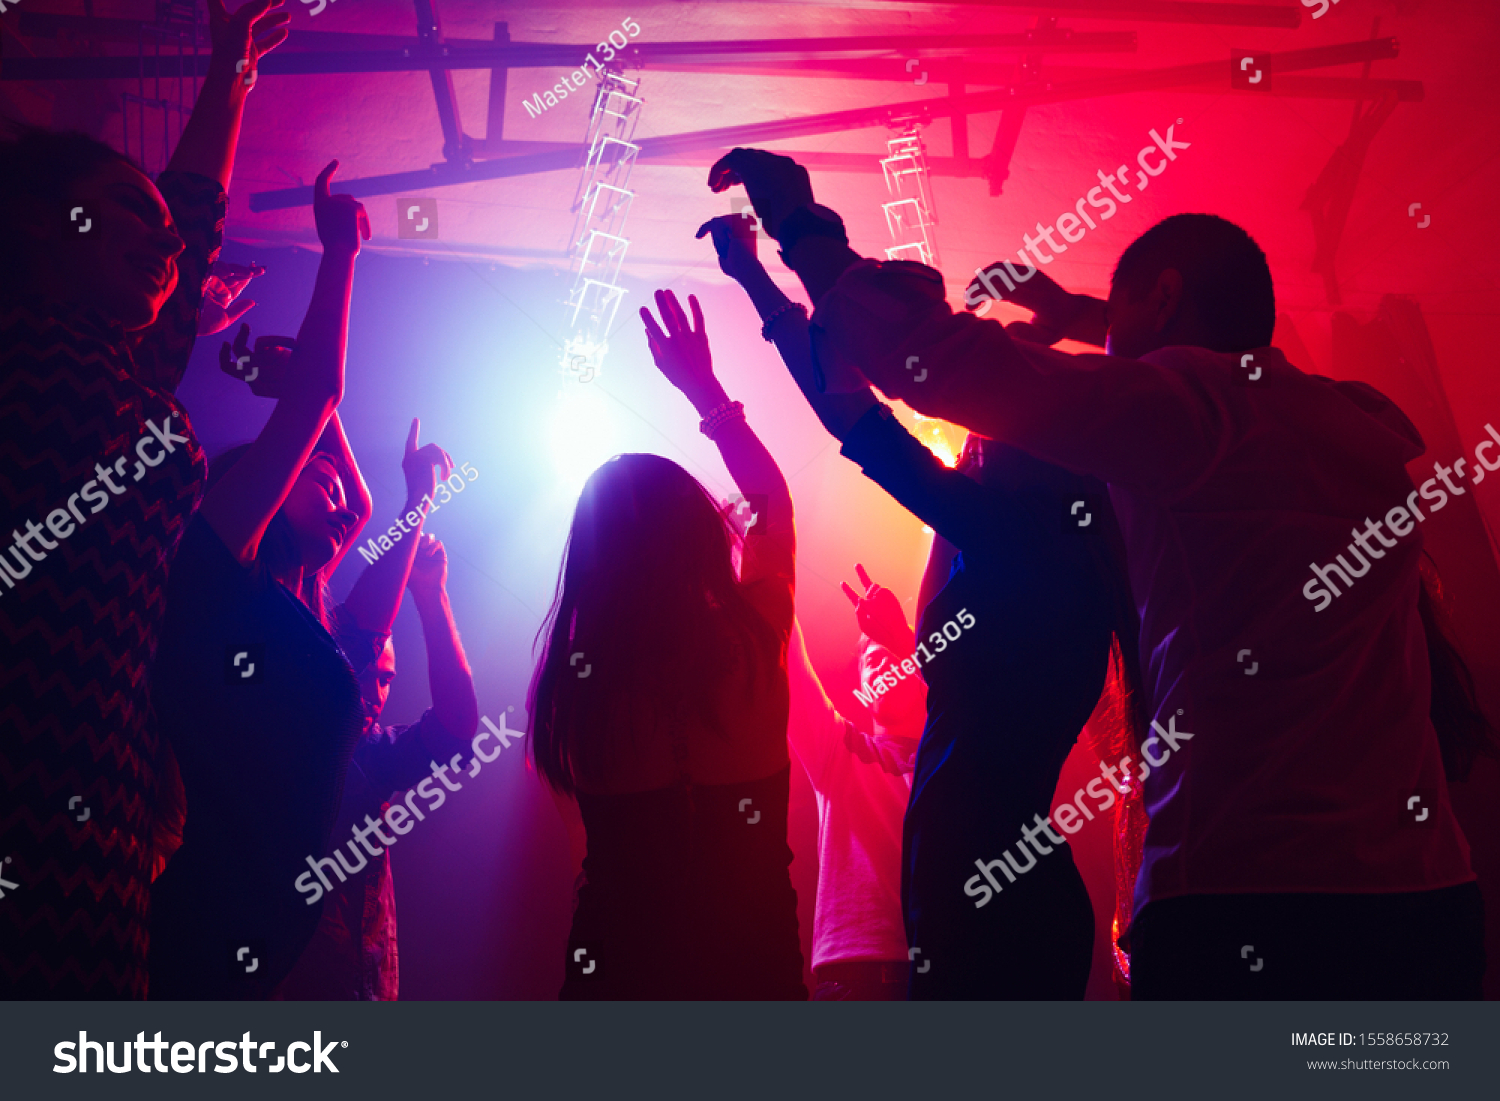 Cheers Crowd People Silhouette Raises Their Stock Photo 1558658732 ...